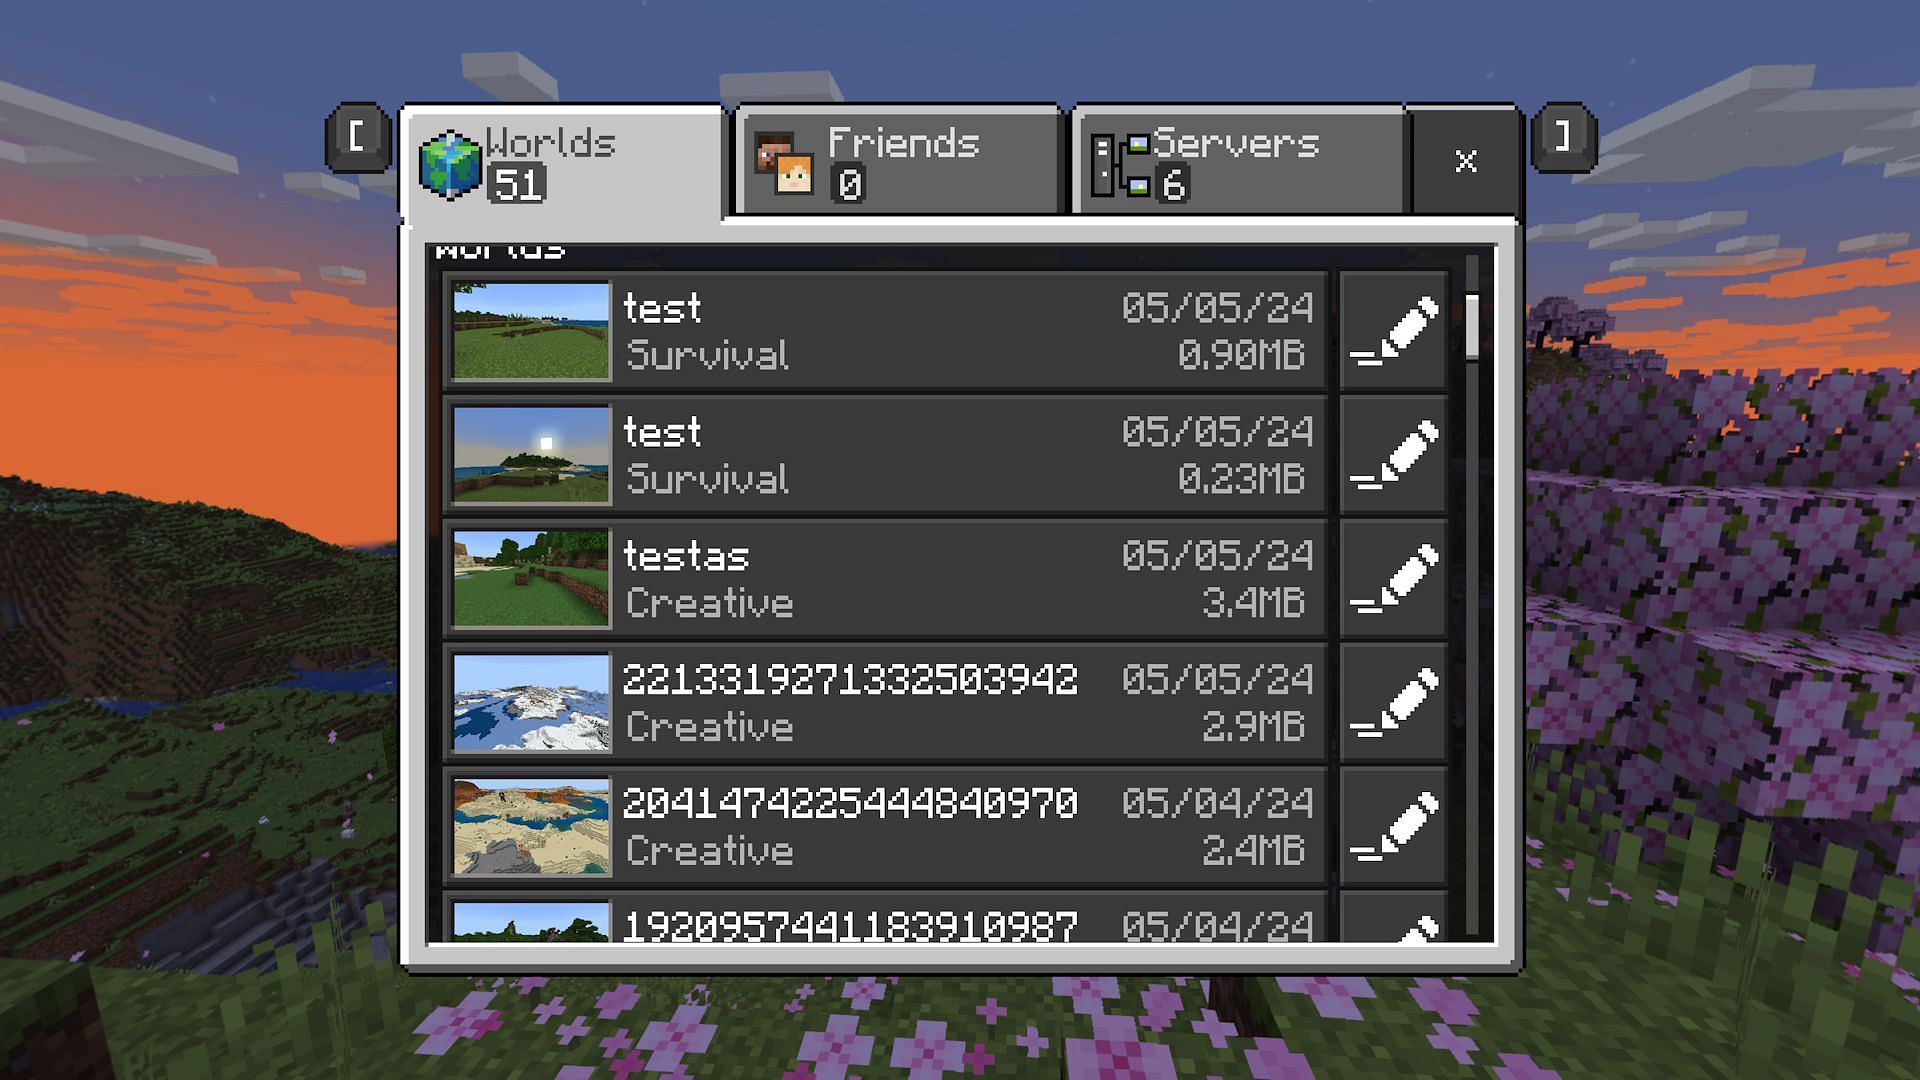 World previews are the easiest way to identify worlds by their files (Image via Mojang)